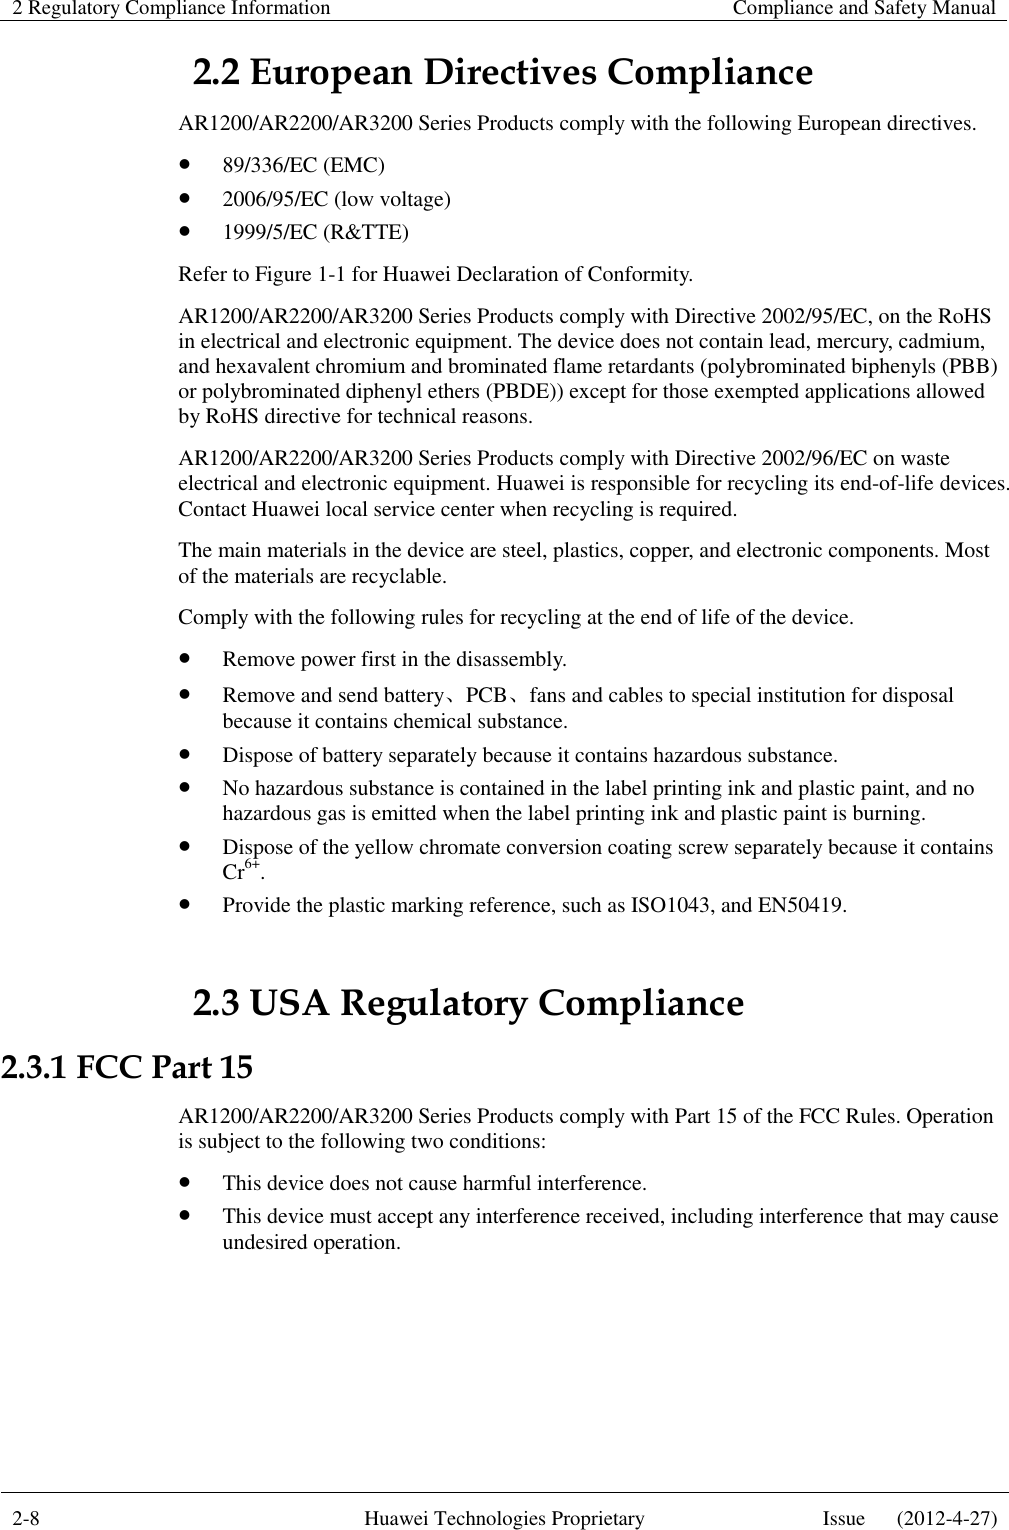 2 Regulatory Compliance Information    Compliance and Safety Manual  2-8 Huawei Technologies Proprietary Issue      (2012-4-27)  2.2 European Directives Compliance AR1200/AR2200/AR3200 Series Products comply with the following European directives.    89/336/EC (EMC)  2006/95/EC (low voltage)  1999/5/EC (R&amp;TTE) Refer to Figure 1-1 for Huawei Declaration of Conformity. AR1200/AR2200/AR3200 Series Products comply with Directive 2002/95/EC, on the RoHS in electrical and electronic equipment. The device does not contain lead, mercury, cadmium, and hexavalent chromium and brominated flame retardants (polybrominated biphenyls (PBB) or polybrominated diphenyl ethers (PBDE)) except for those exempted applications allowed by RoHS directive for technical reasons. AR1200/AR2200/AR3200 Series Products comply with Directive 2002/96/EC on waste electrical and electronic equipment. Huawei is responsible for recycling its end-of-life devices. Contact Huawei local service center when recycling is required. The main materials in the device are steel, plastics, copper, and electronic components. Most of the materials are recyclable. Comply with the following rules for recycling at the end of life of the device.  Remove power first in the disassembly.  Remove and send battery、PCB、fans and cables to special institution for disposal because it contains chemical substance.  Dispose of battery separately because it contains hazardous substance.  No hazardous substance is contained in the label printing ink and plastic paint, and no hazardous gas is emitted when the label printing ink and plastic paint is burning.  Dispose of the yellow chromate conversion coating screw separately because it contains Cr6+.  Provide the plastic marking reference, such as ISO1043, and EN50419. 2.3 USA Regulatory Compliance 2.3.1 FCC Part 15 AR1200/AR2200/AR3200 Series Products comply with Part 15 of the FCC Rules. Operation is subject to the following two conditions:  This device does not cause harmful interference.  This device must accept any interference received, including interference that may cause undesired operation.    